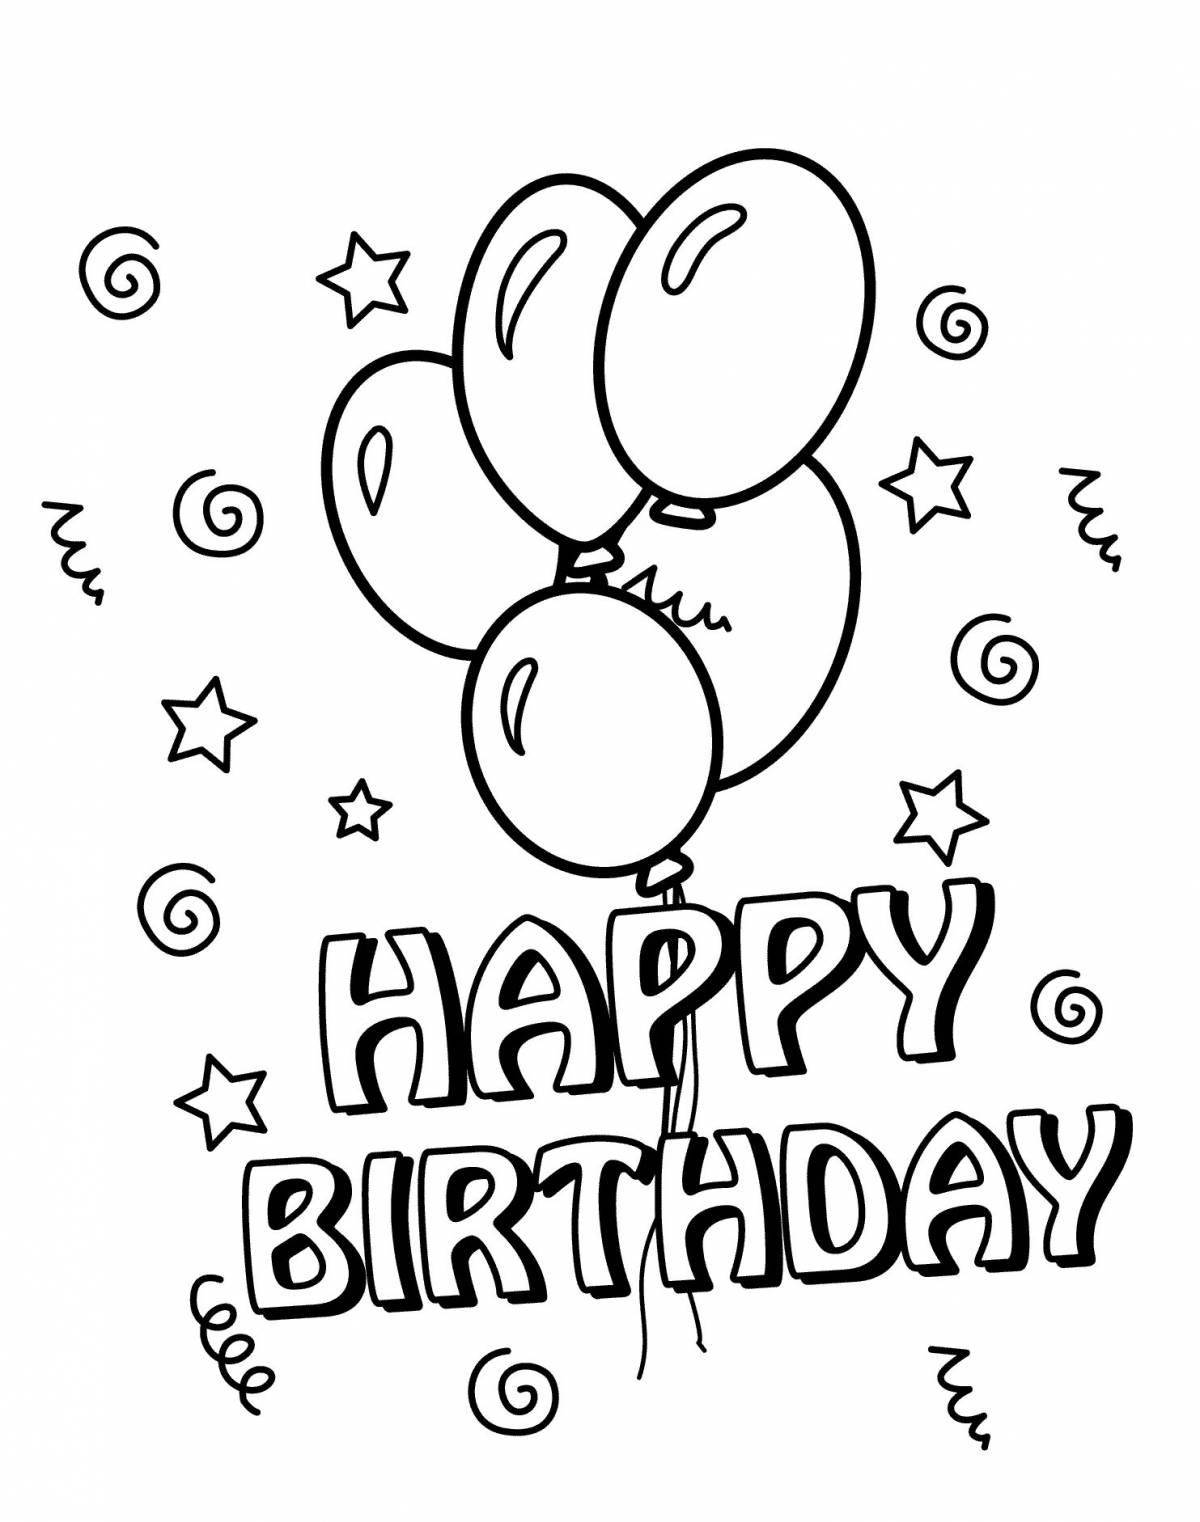 Color frenzy coloring page brother birthday